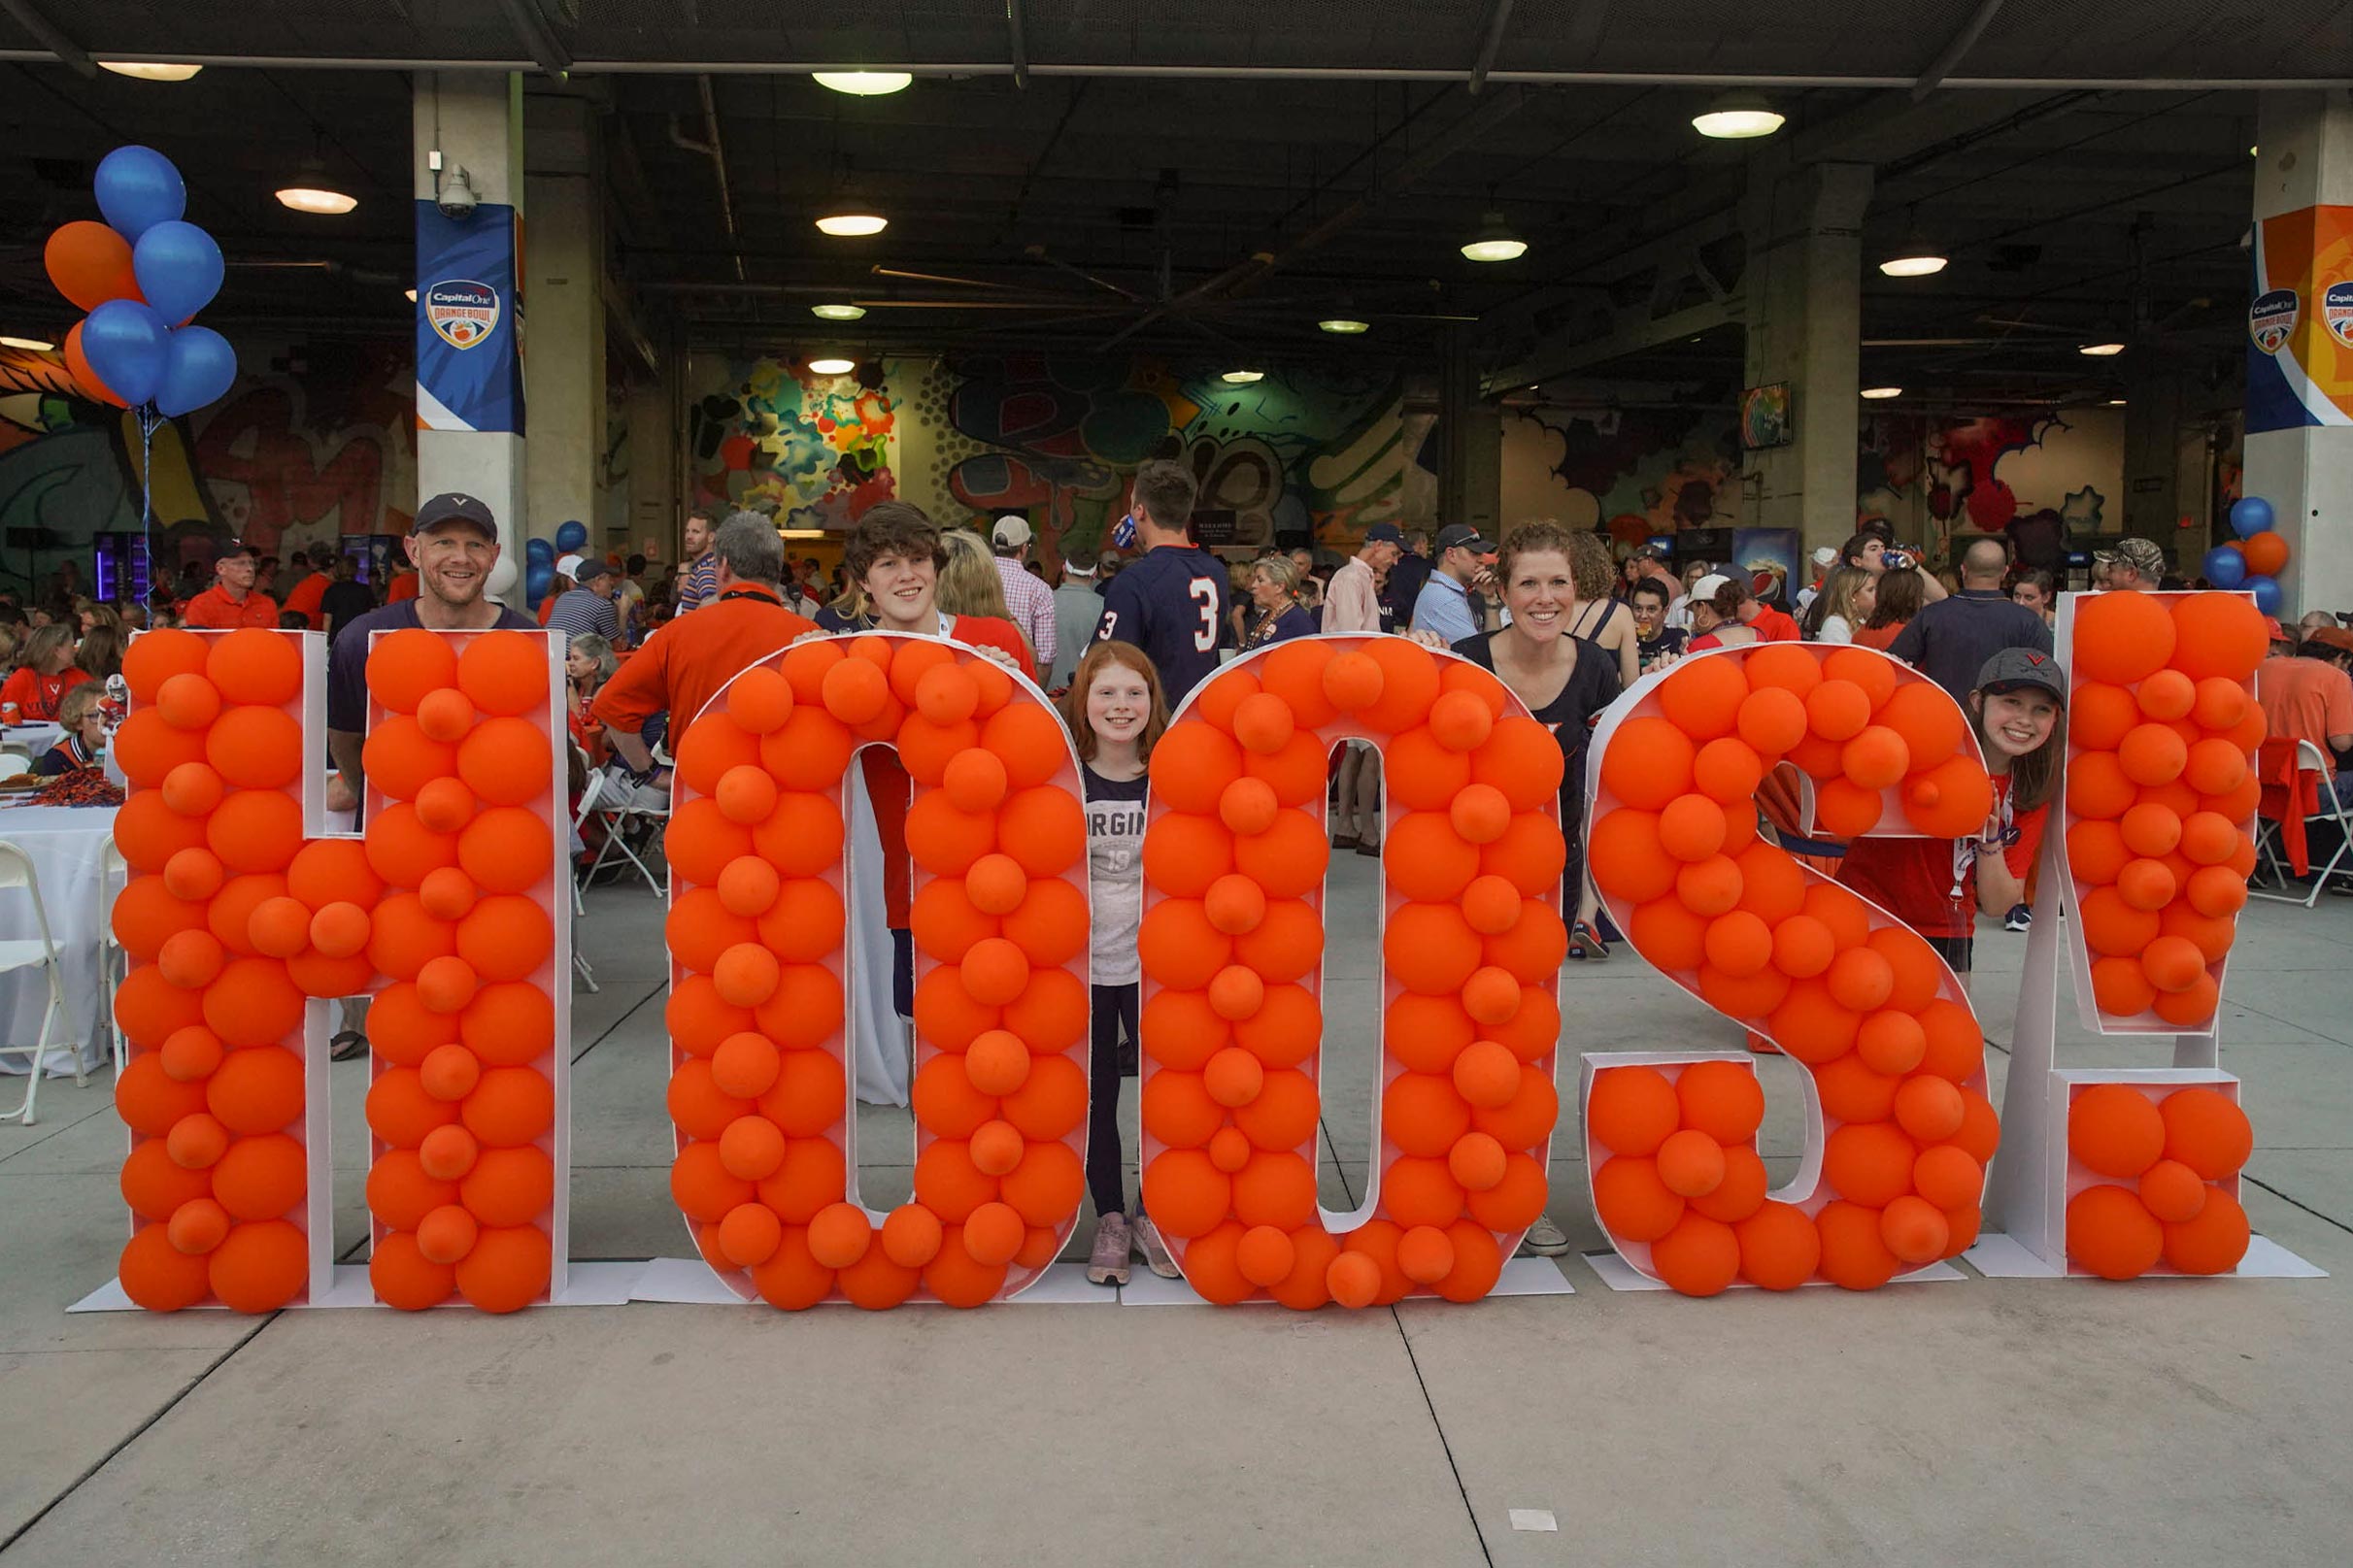 UVA Fans take a family photo with a balloon sculpture that spells HOOS!